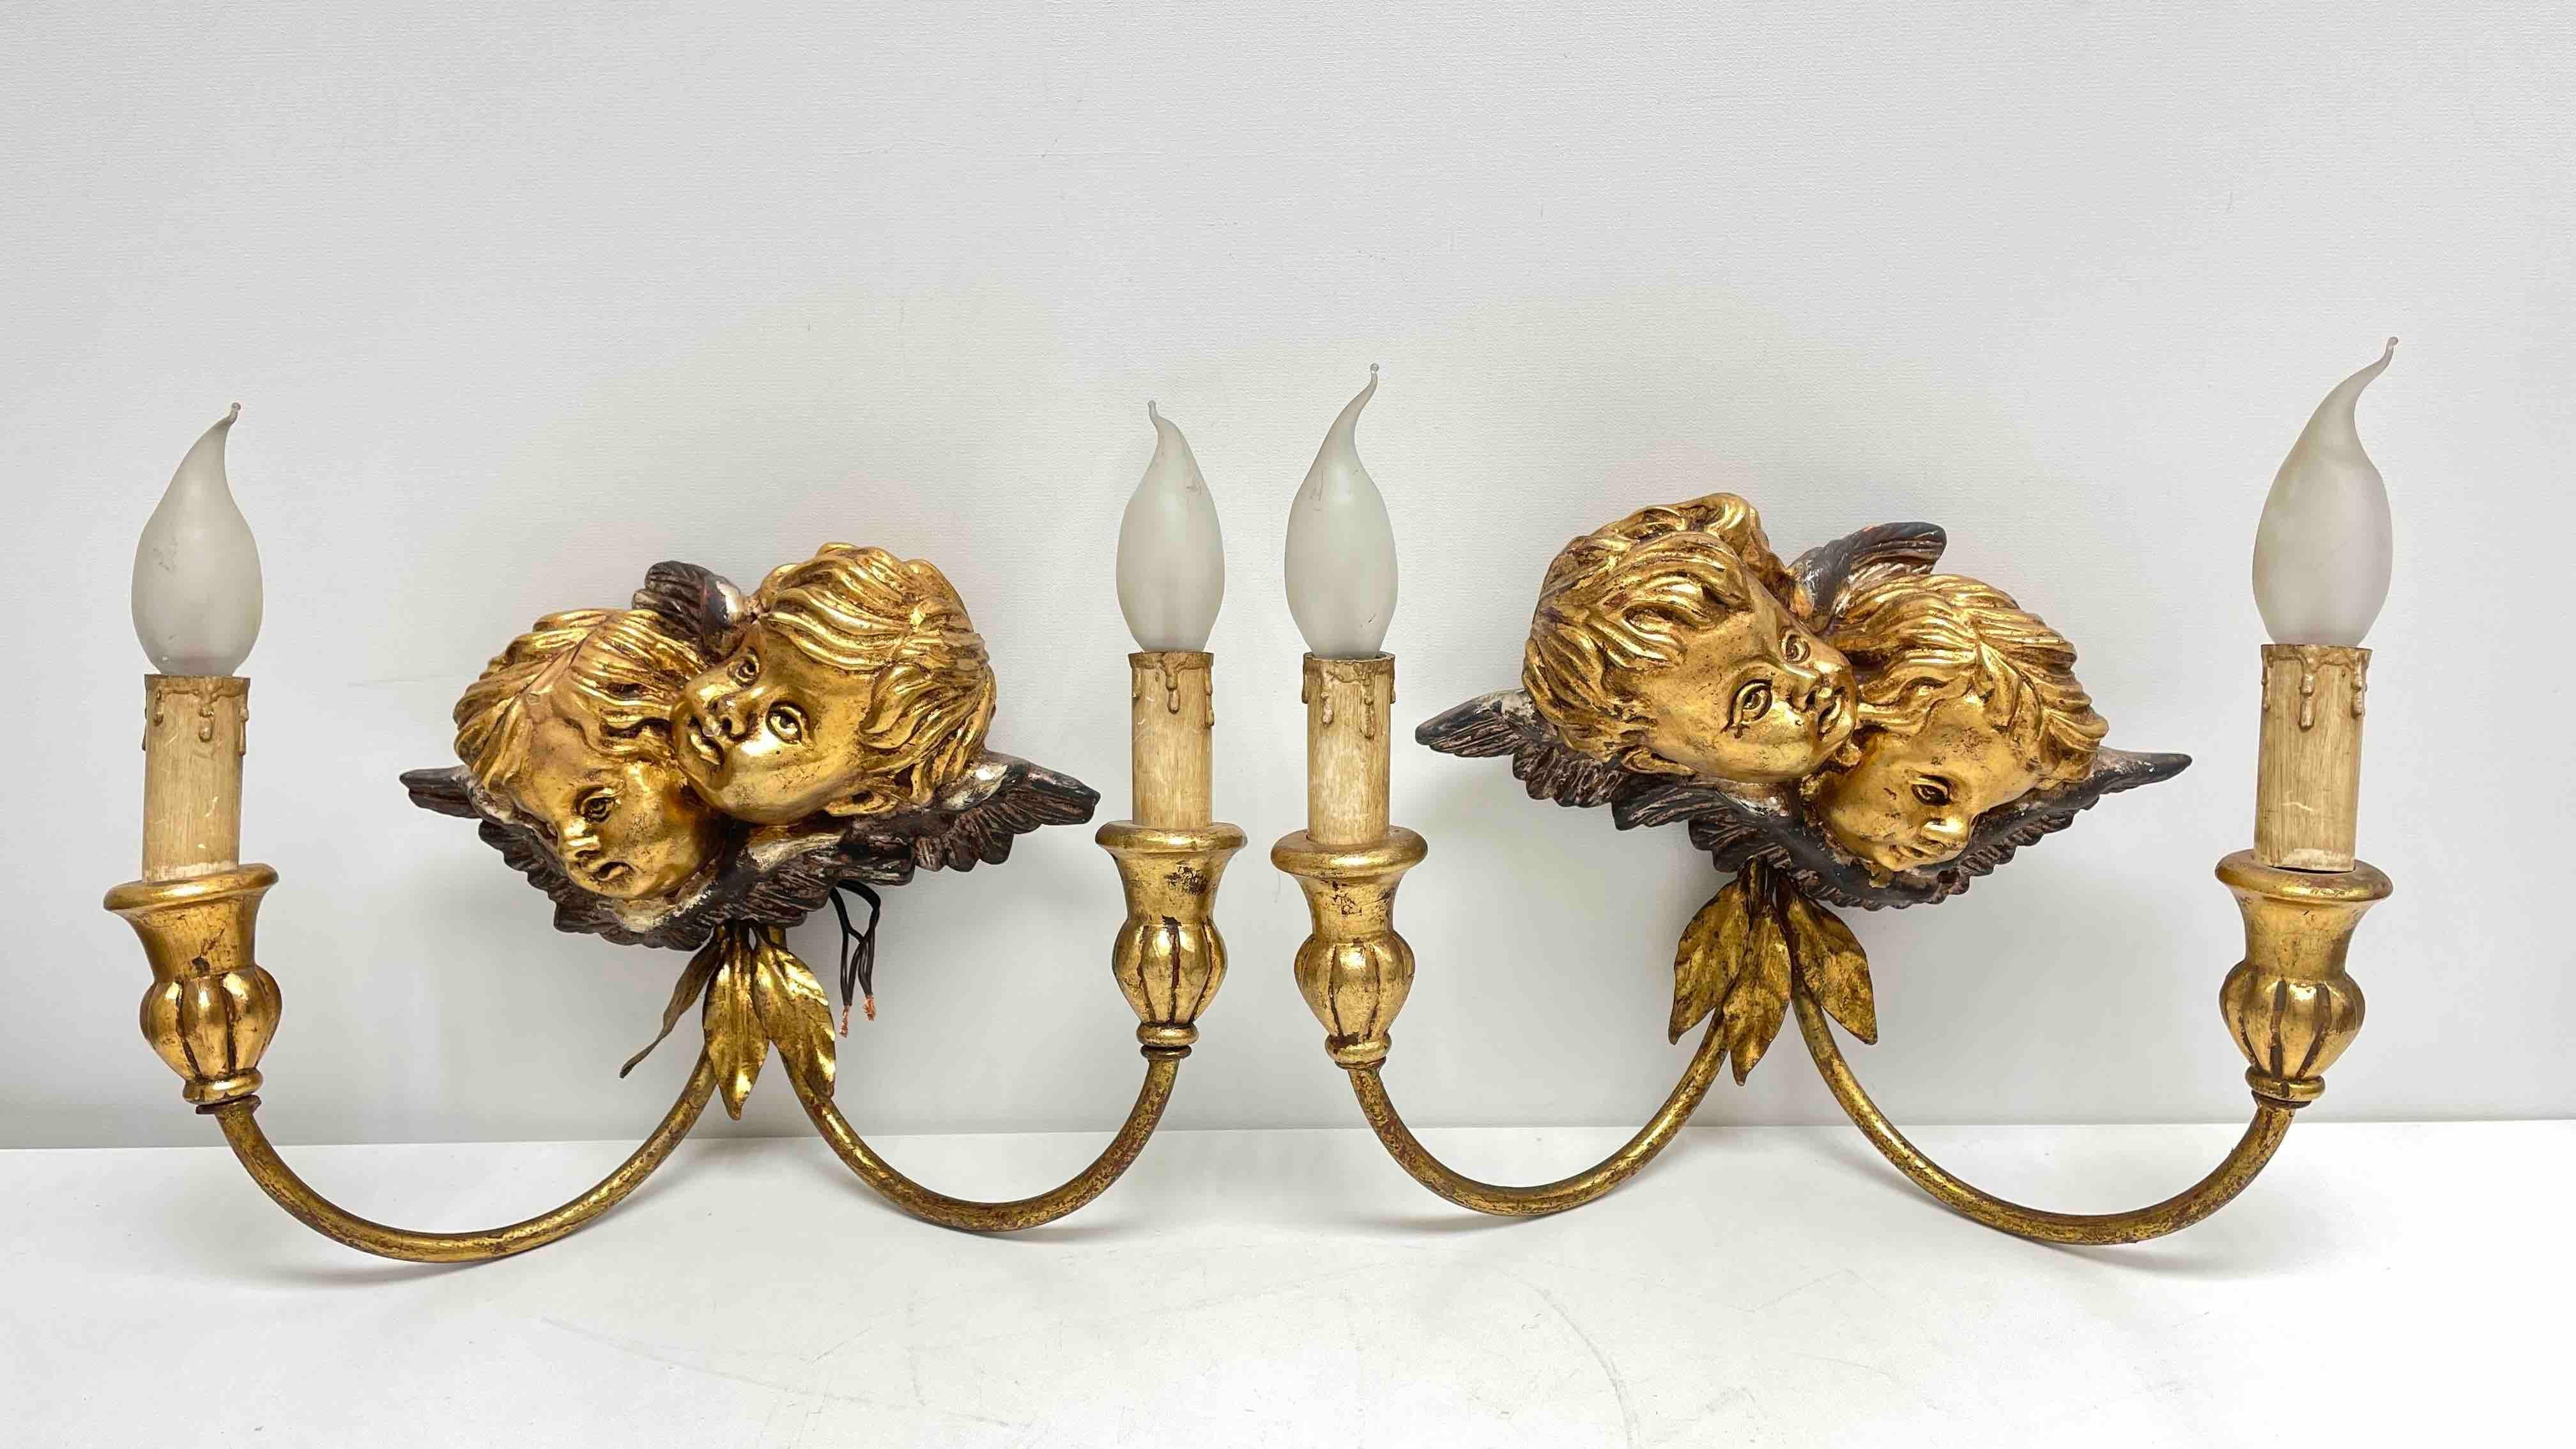 Two pair Hollywood Regency midcentury gilt tole sconces with wooden hand carved cherub angel heads, each fixture requires two European E14 candelabra bulbs, each bulb up to 40 watts. The wall lights have a beautiful patina and give each room a